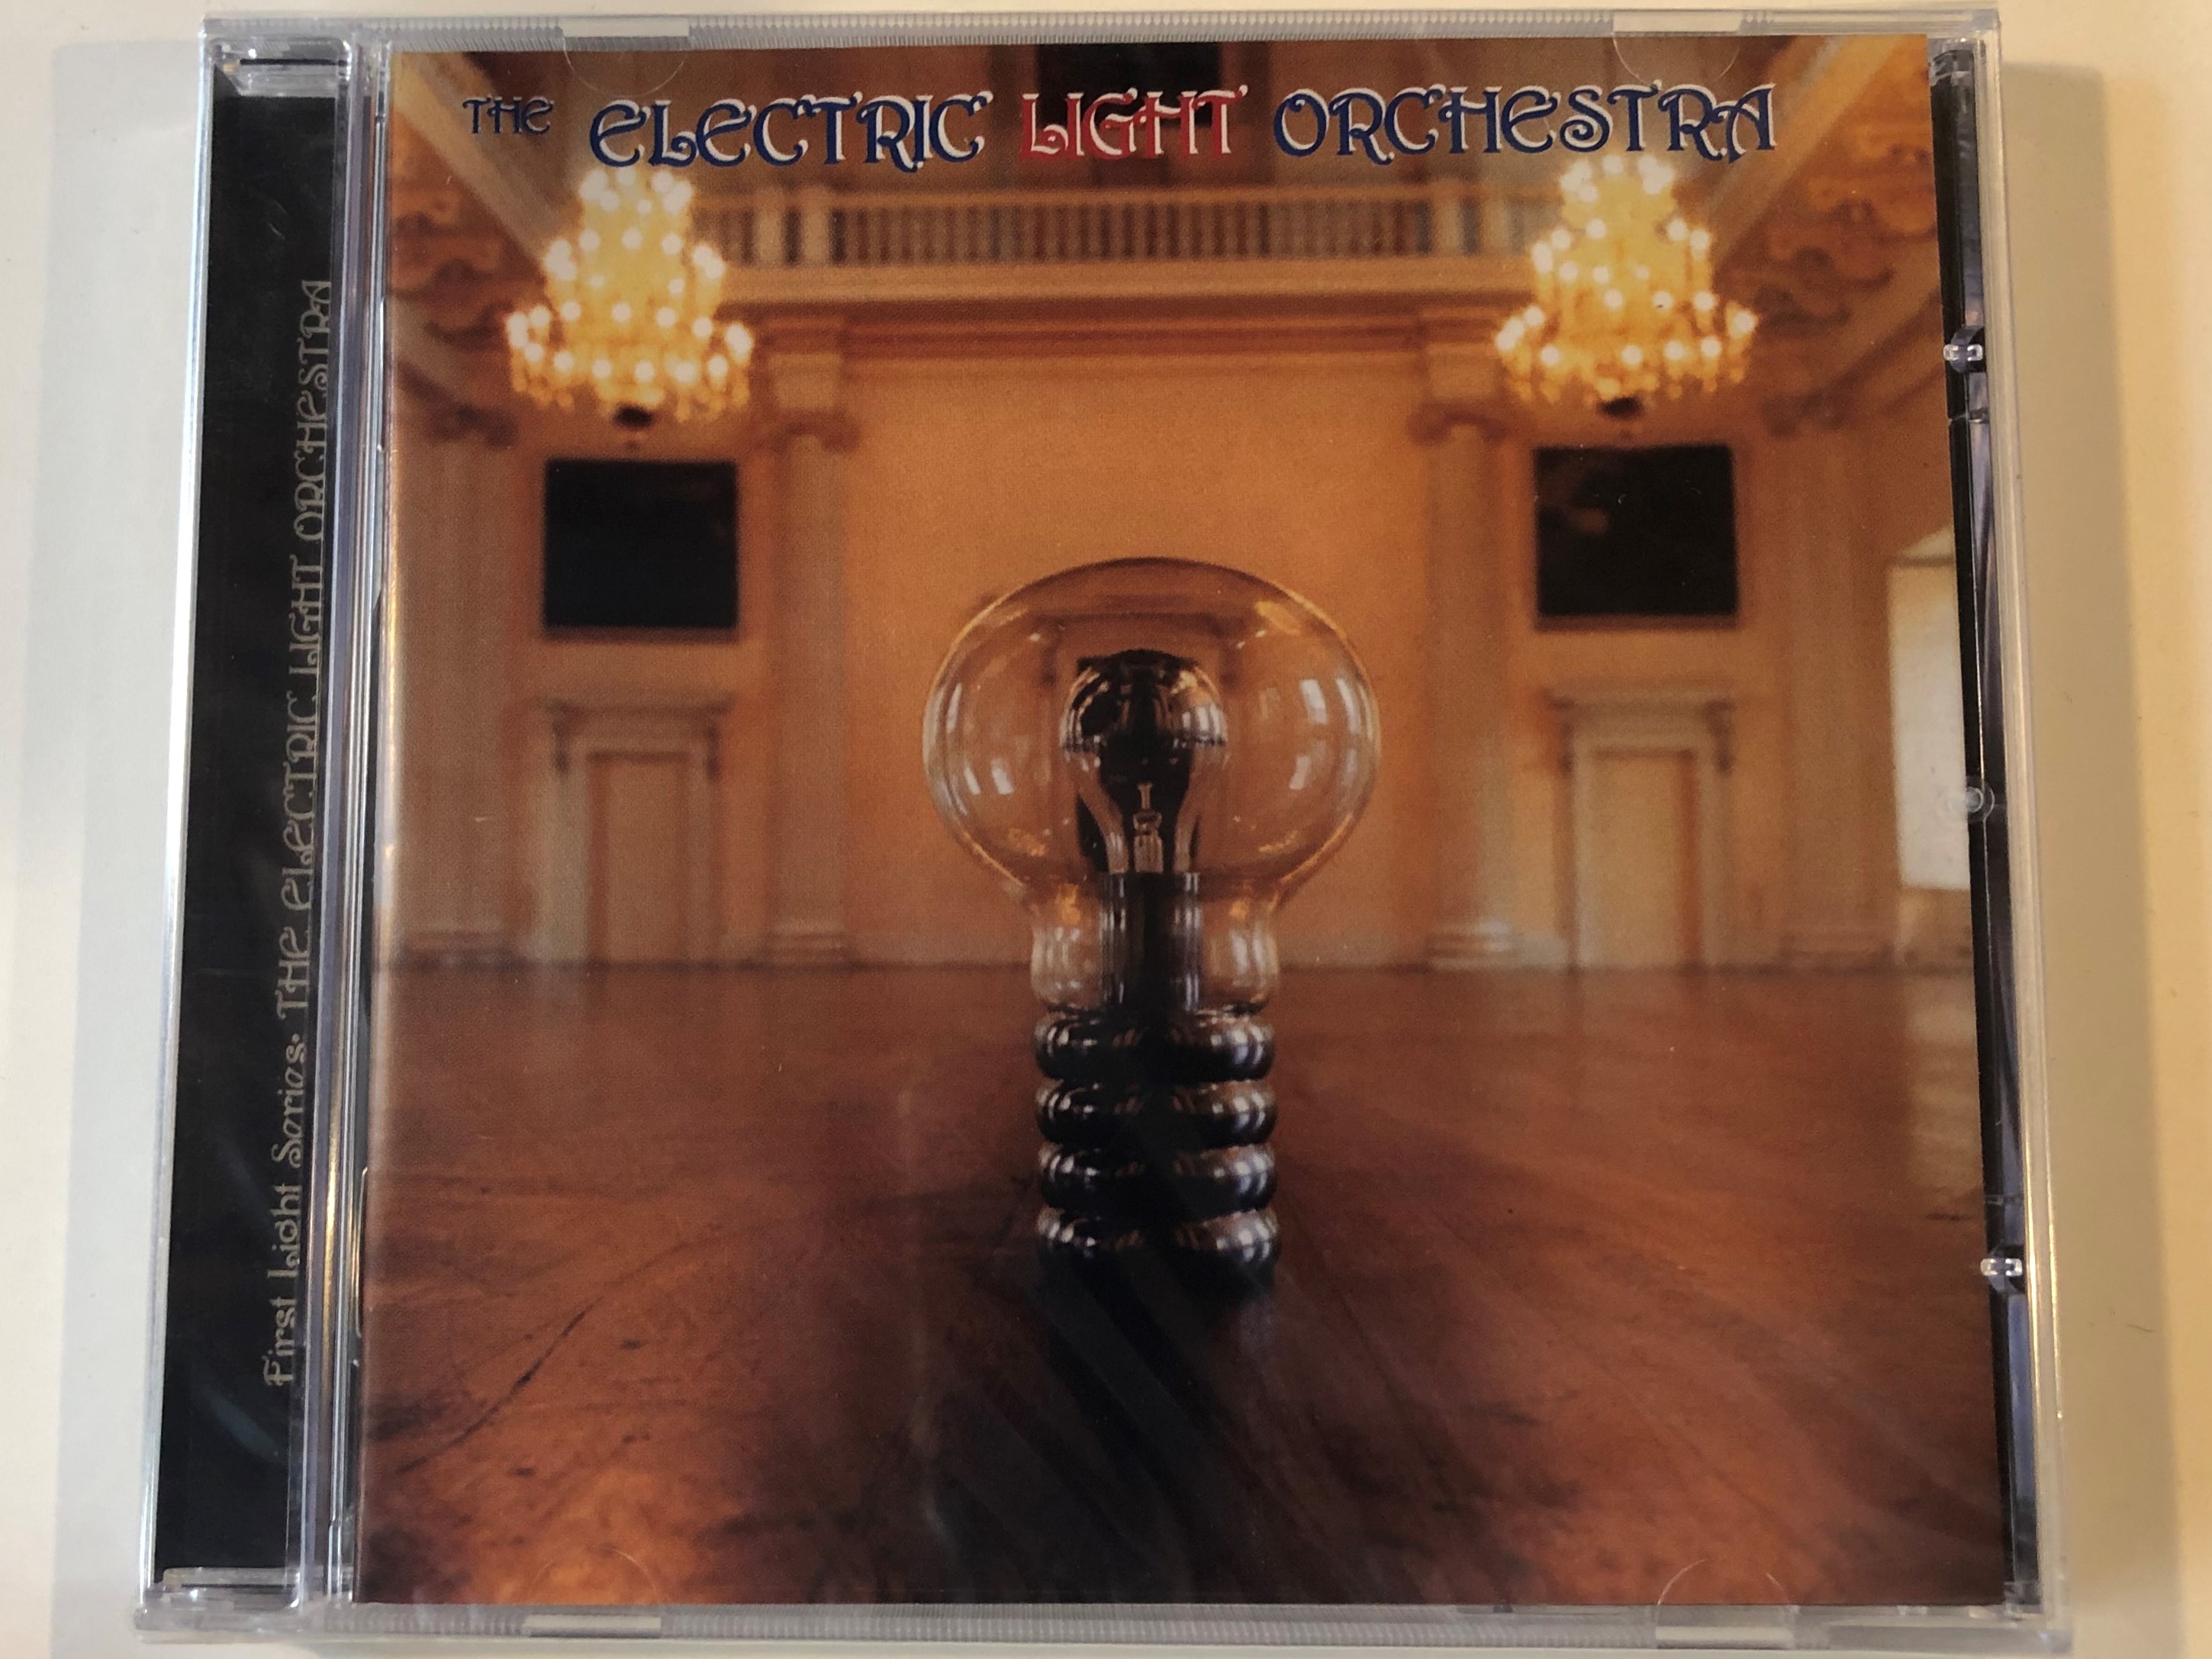 the-electric-light-orchestra-first-light-series-harvest-audio-cd-2003-724358298307-1-.jpg